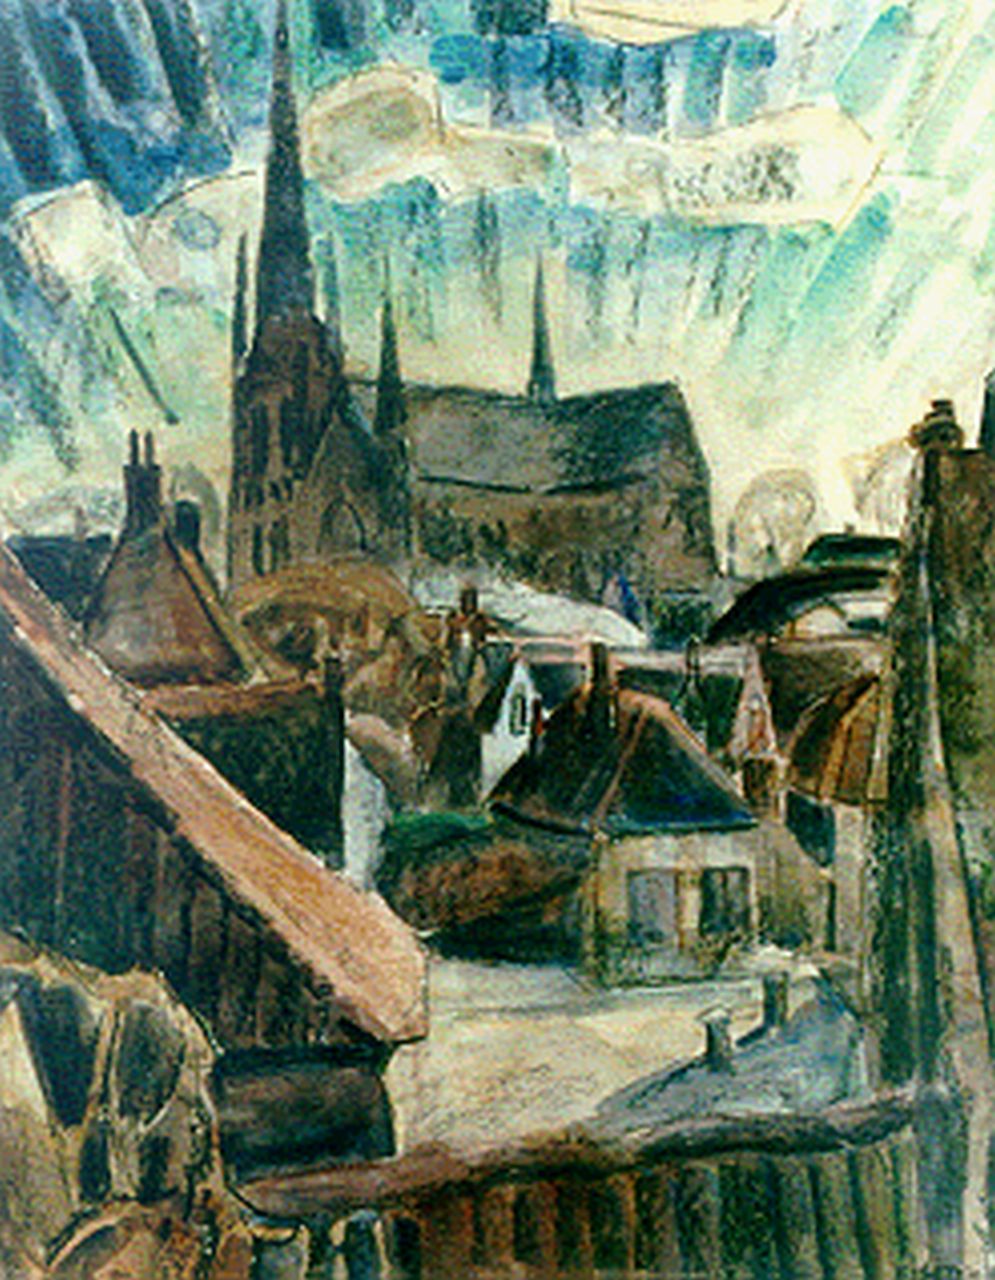 Gestel L.  | Leendert 'Leo' Gestel, A view of Woerden, mixed media on paper on wood 62.7 x 49.3 cm, signed l.r. and dated '19